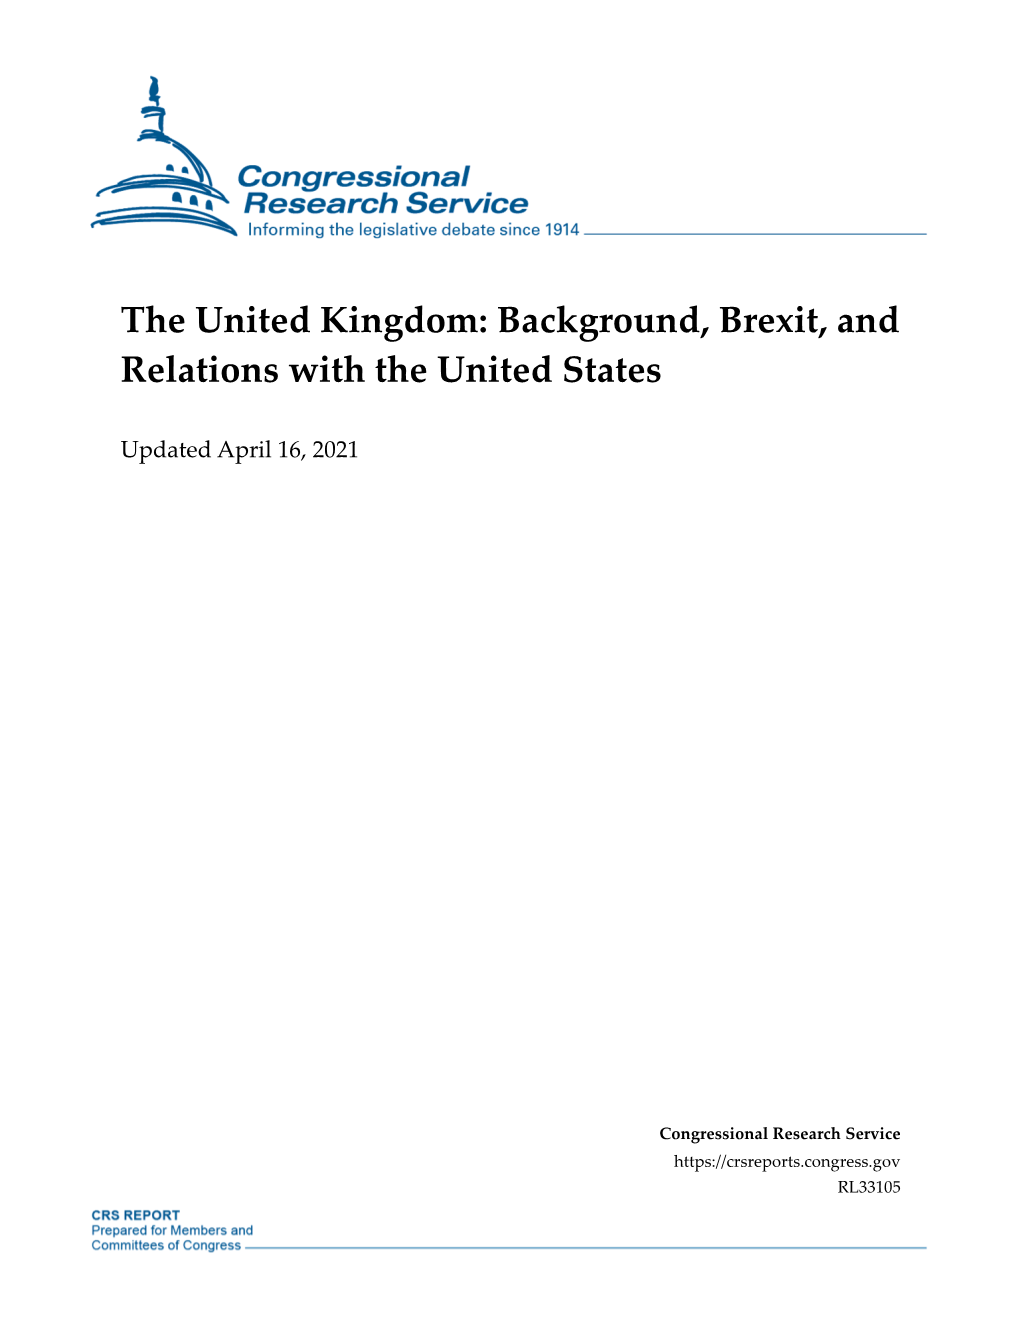 The United Kingdom: Background, Brexit, and Relations with the United States